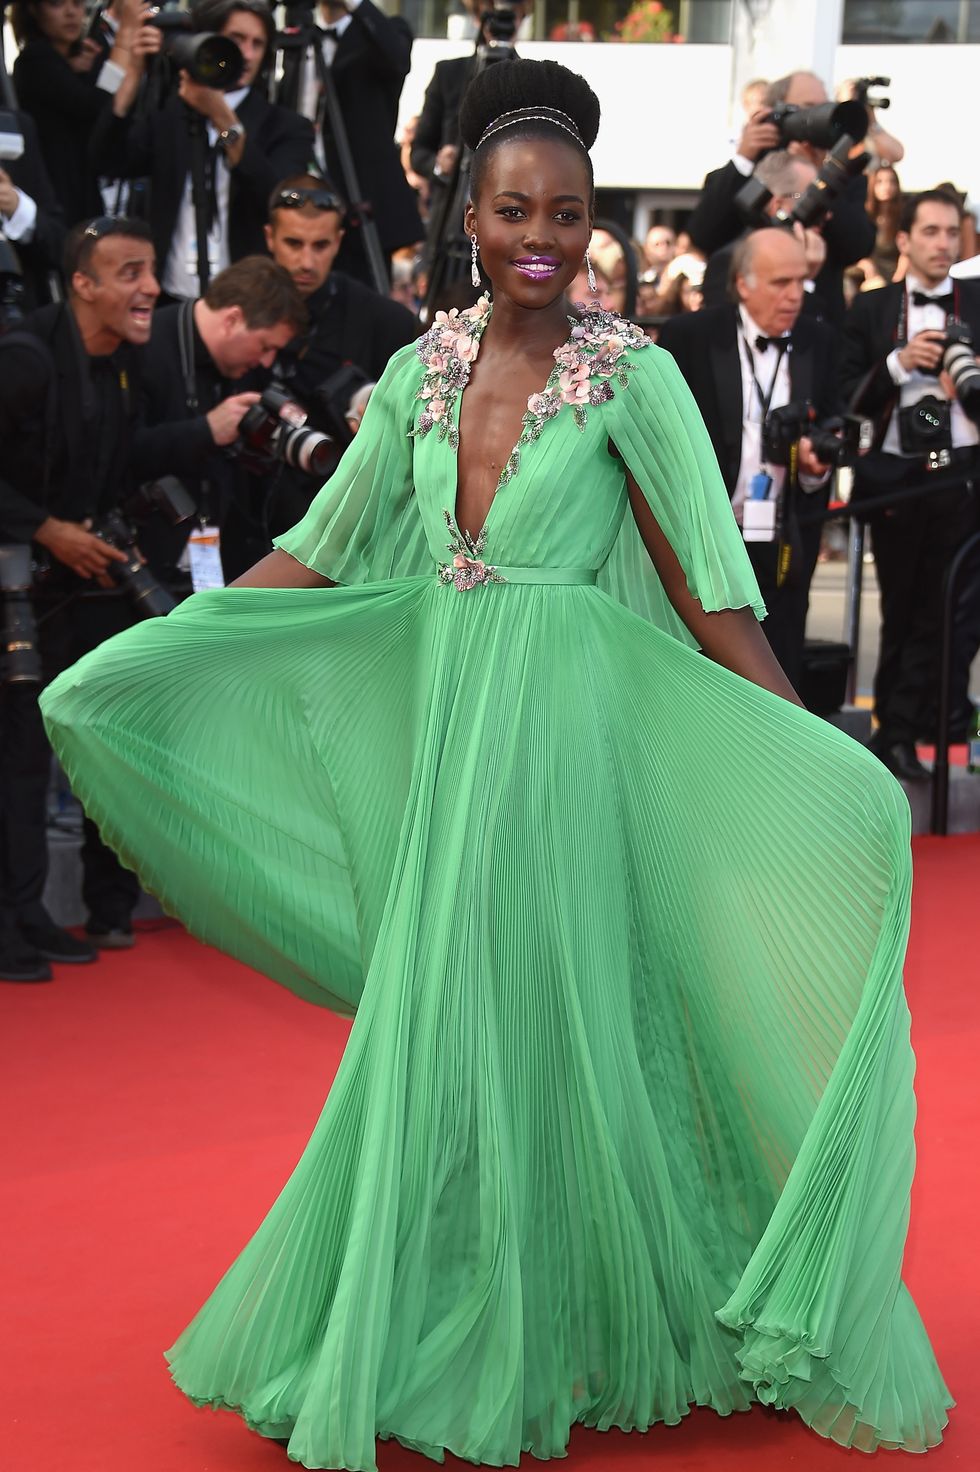 Lupita Nyong'o at the Cannes Film Festival